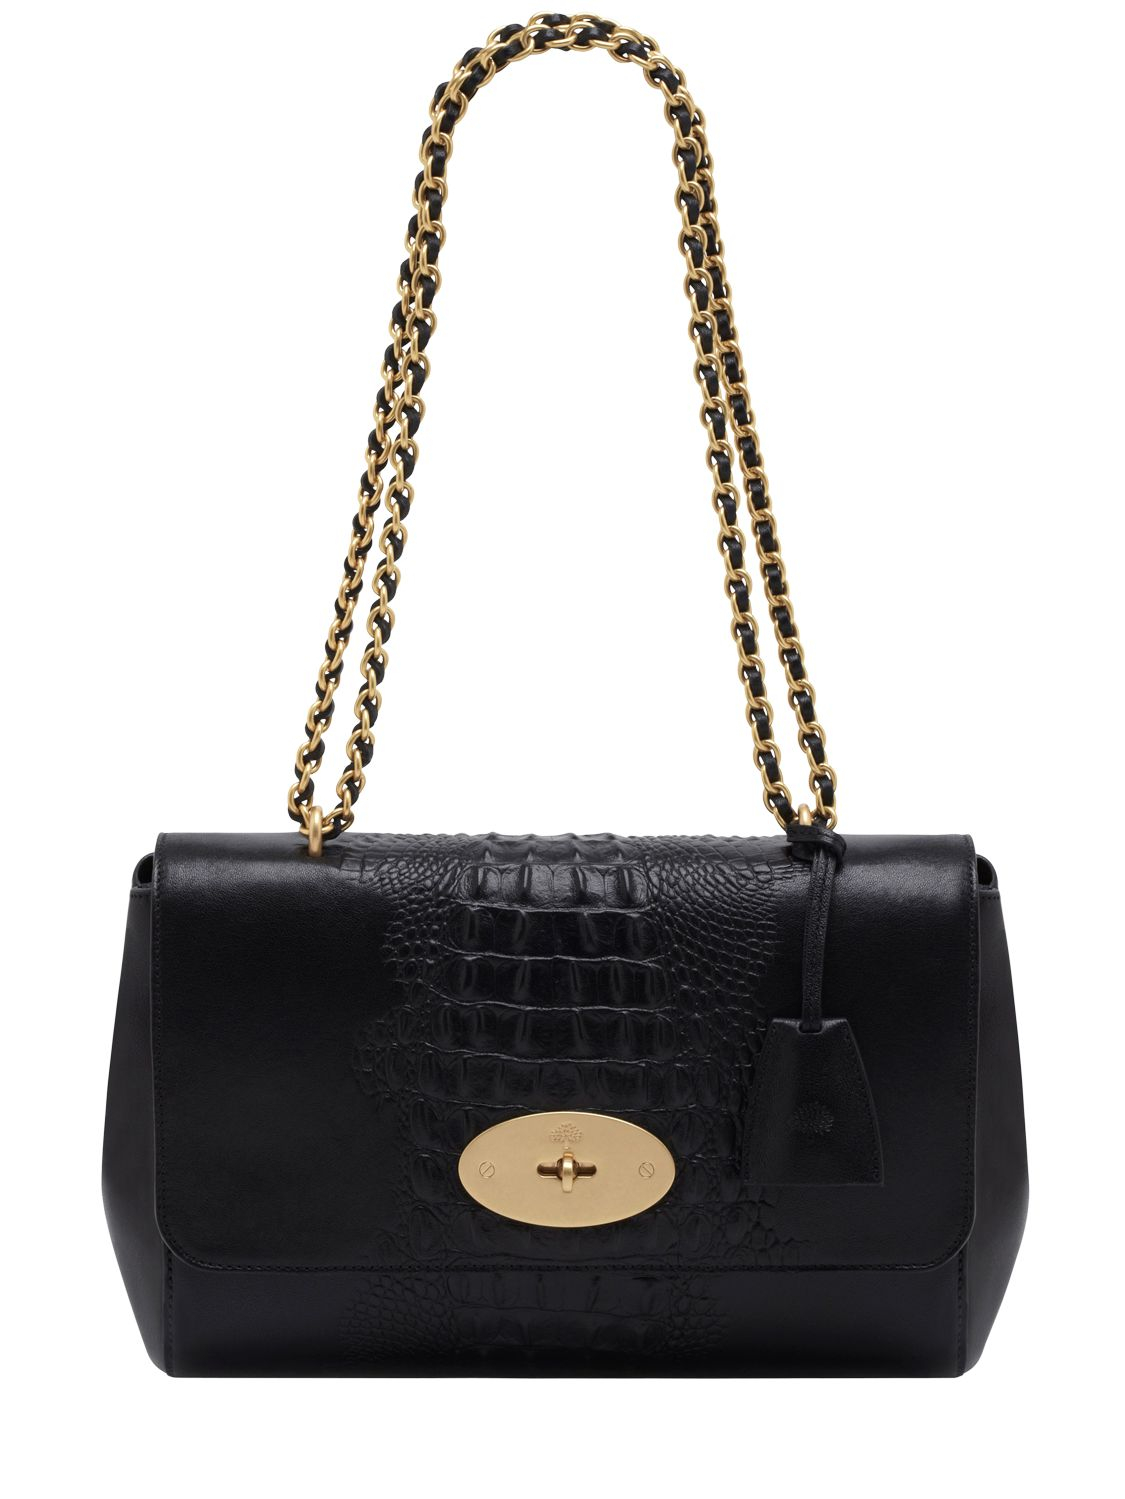 Lyst - Mulberry Medium Lily Croc Nappa Leather Bag in Black